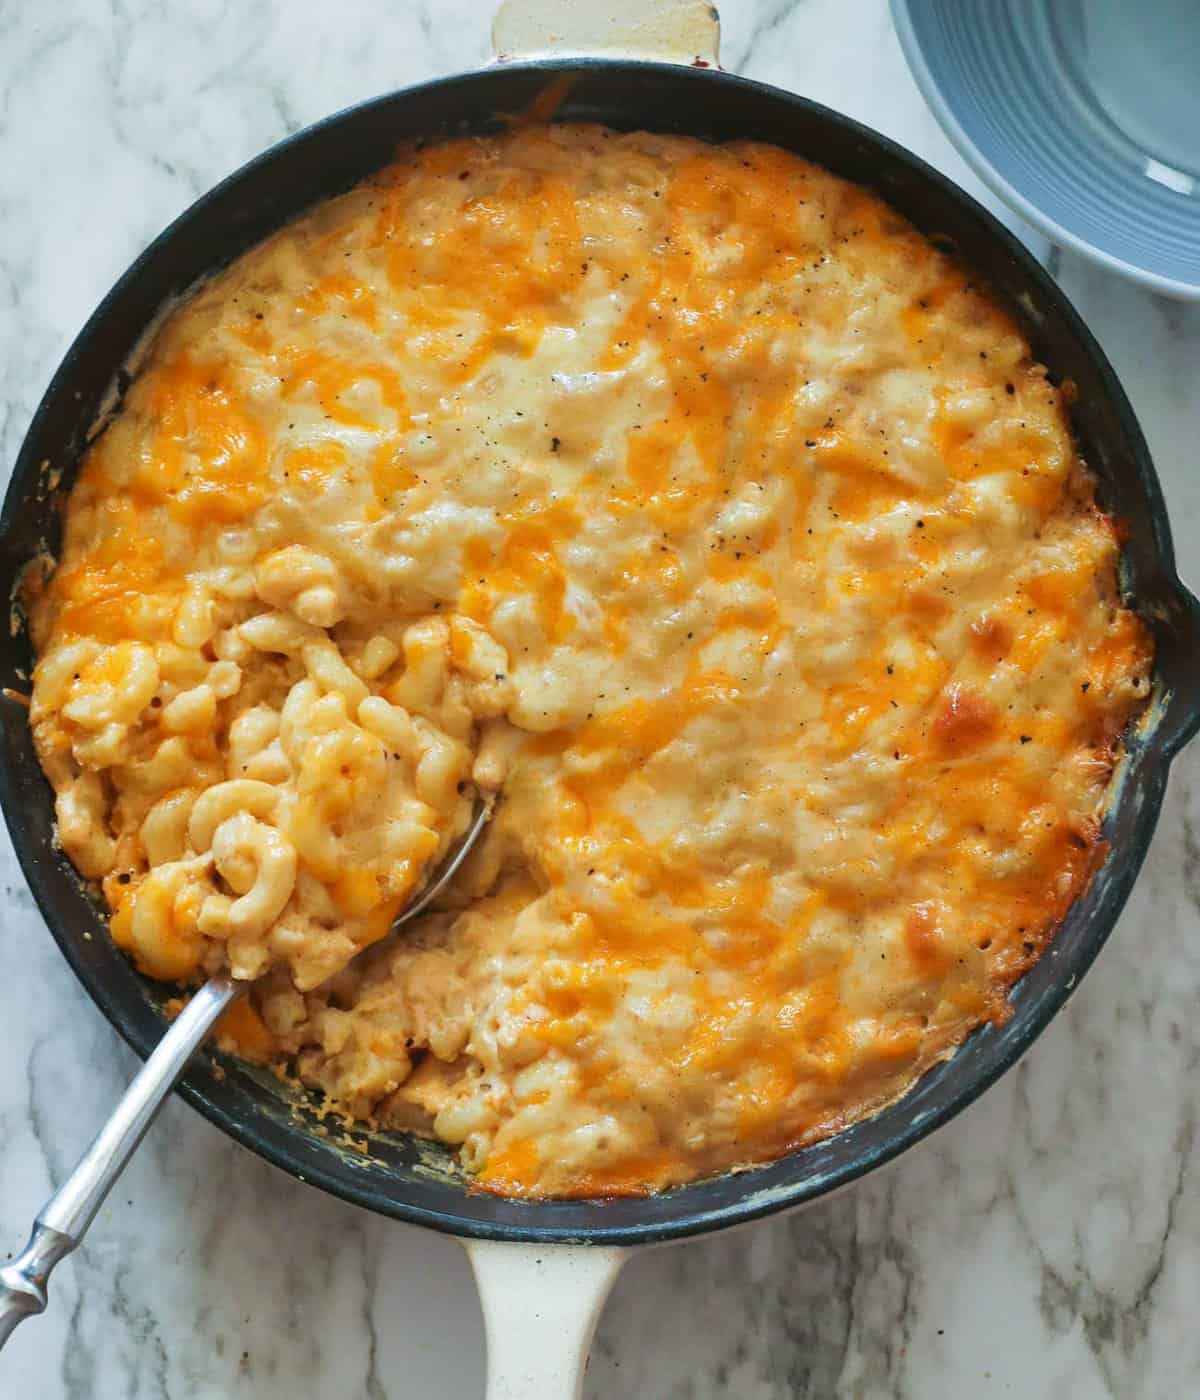 Serving Smoked Mac and Cheese from a cast-iron skillet